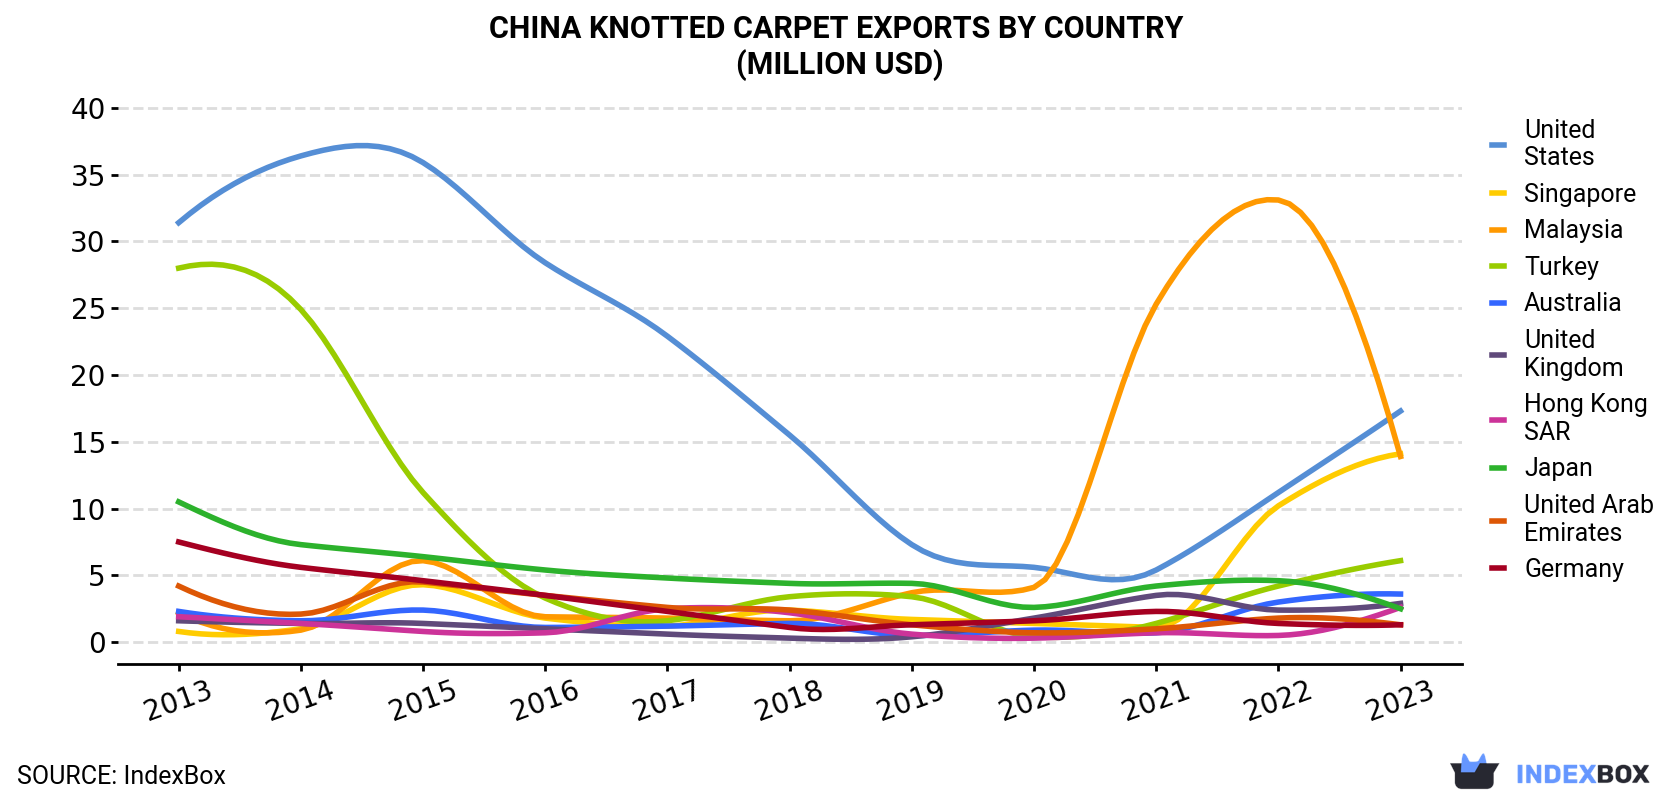 China Knotted Carpet Exports By Country (Million USD)